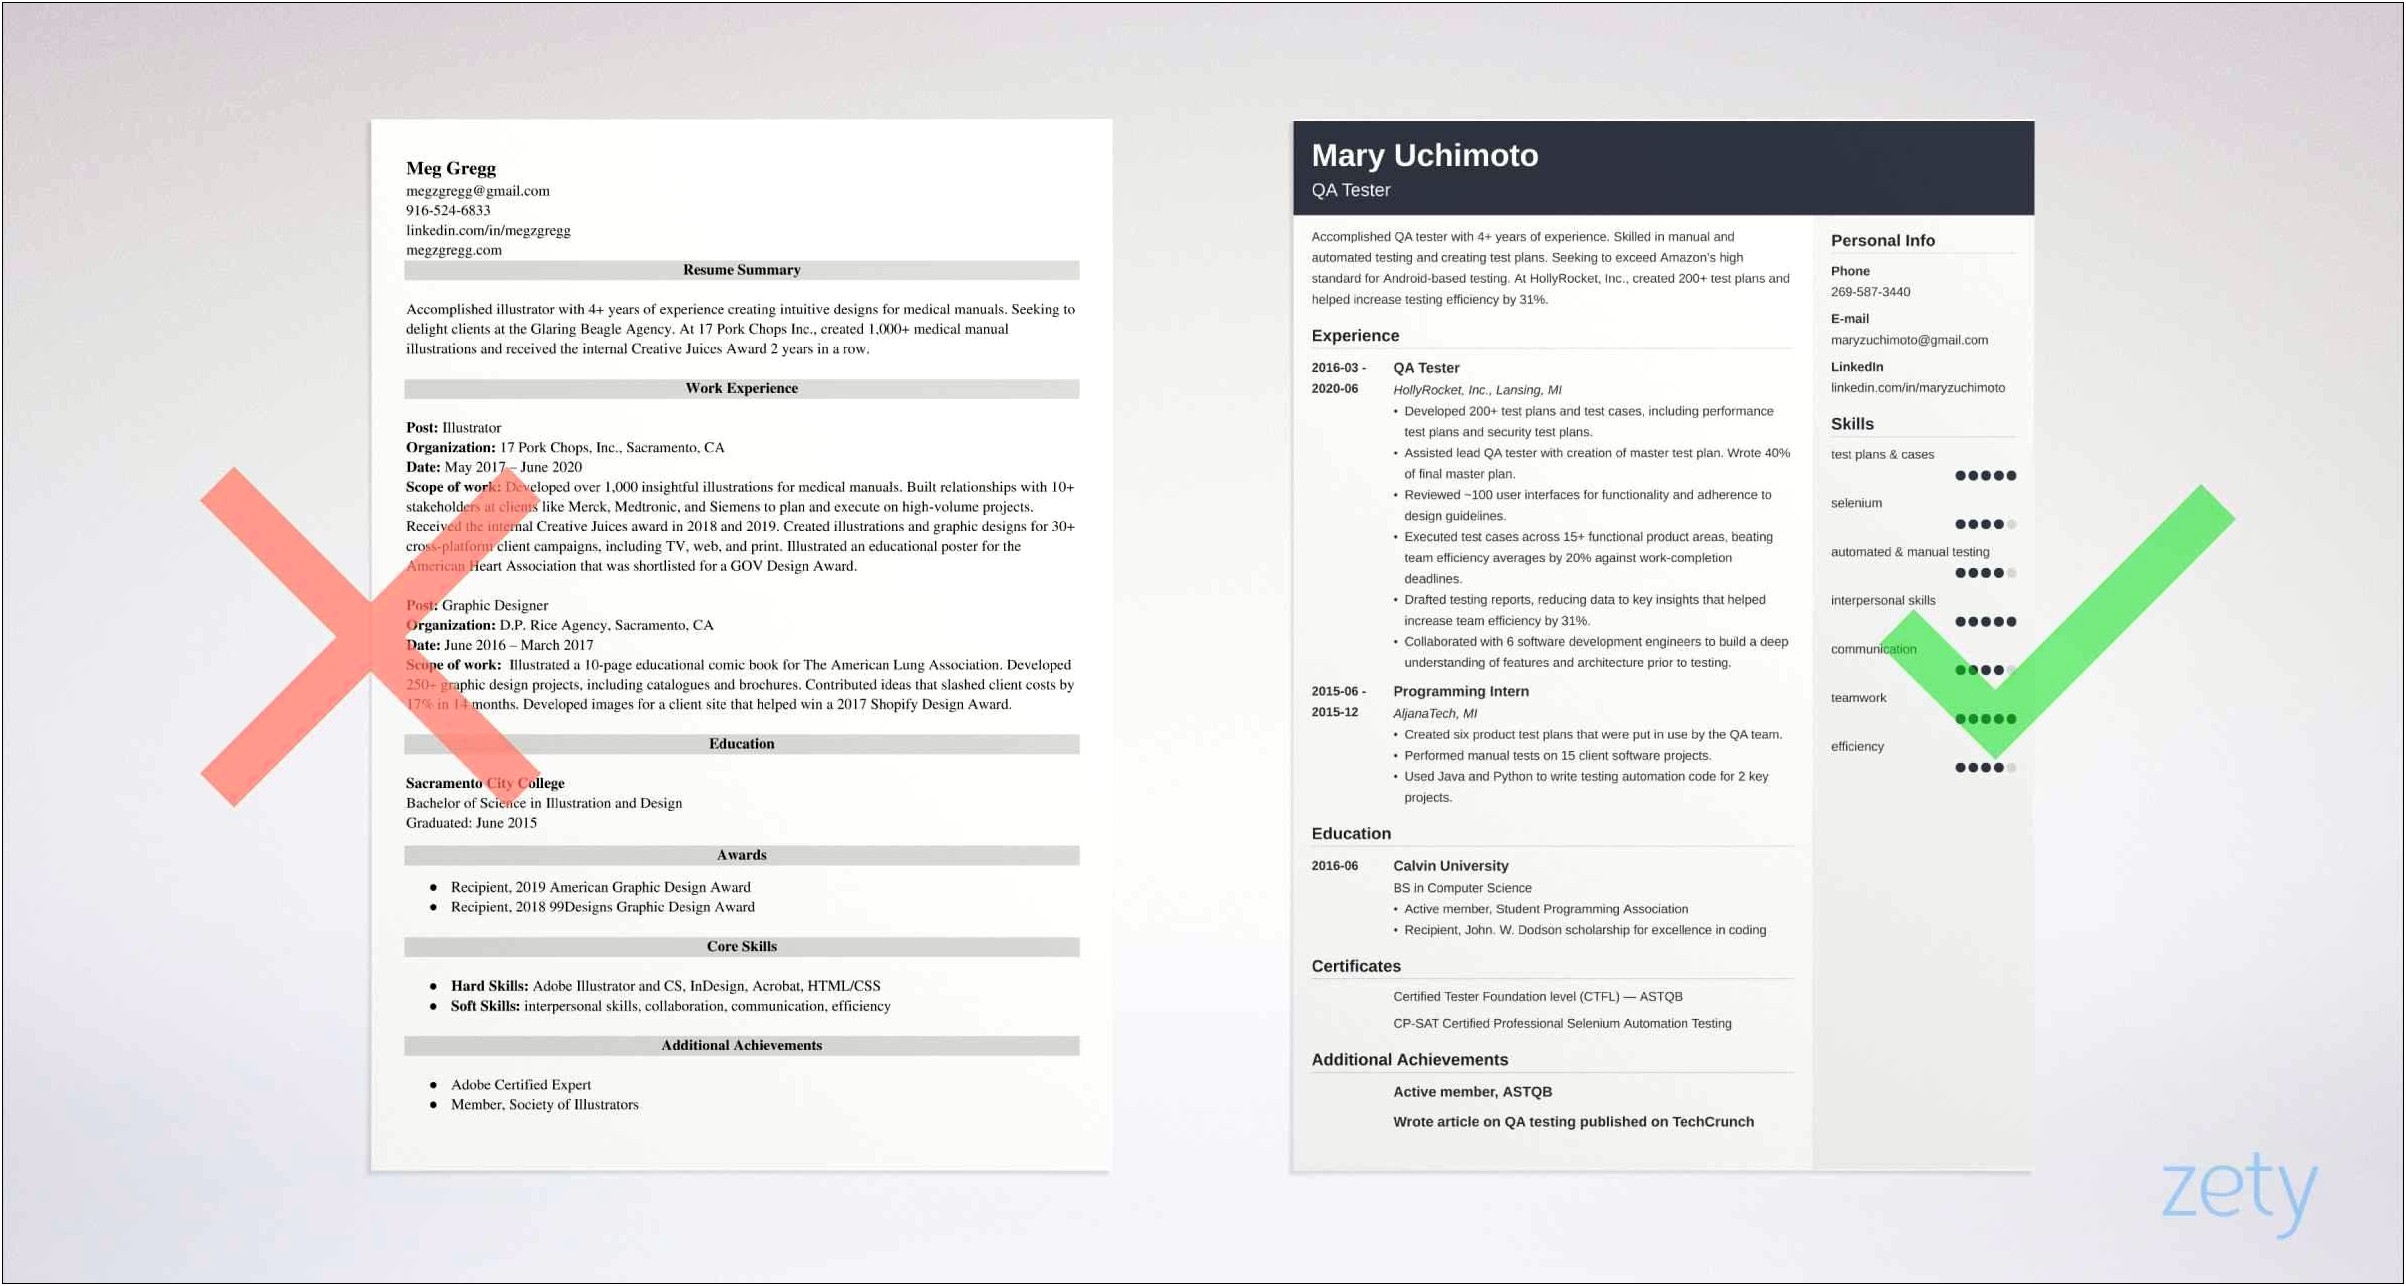 Automation Testing Resume For 3 Years Experience